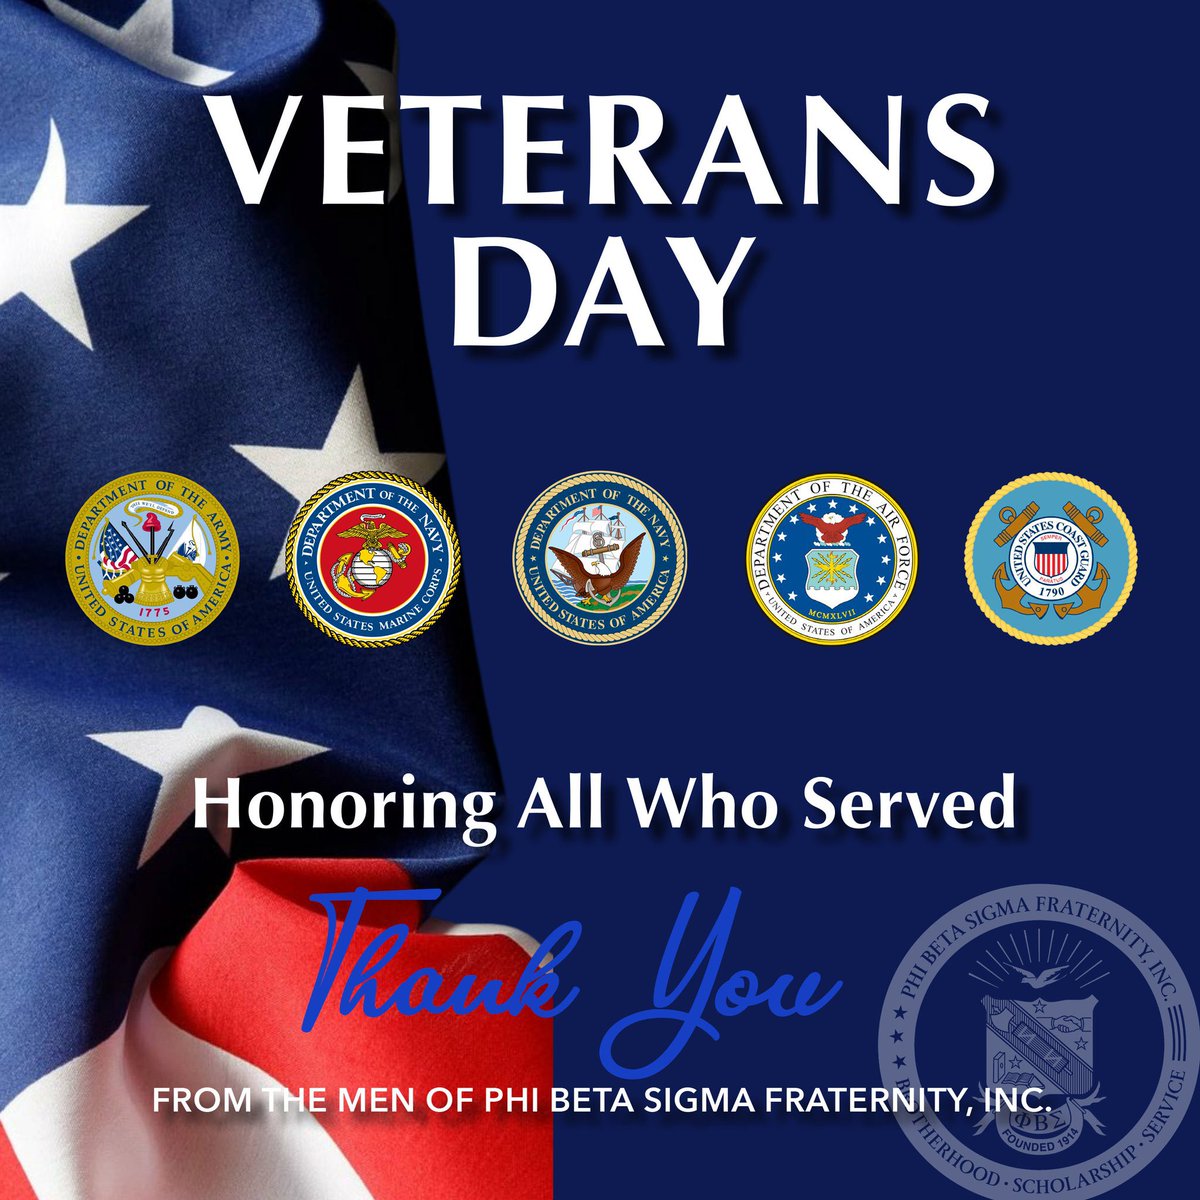 On this day, we honor those who fought bravely for our freedom! #VeteransDay #pbs1914 #Sigma109